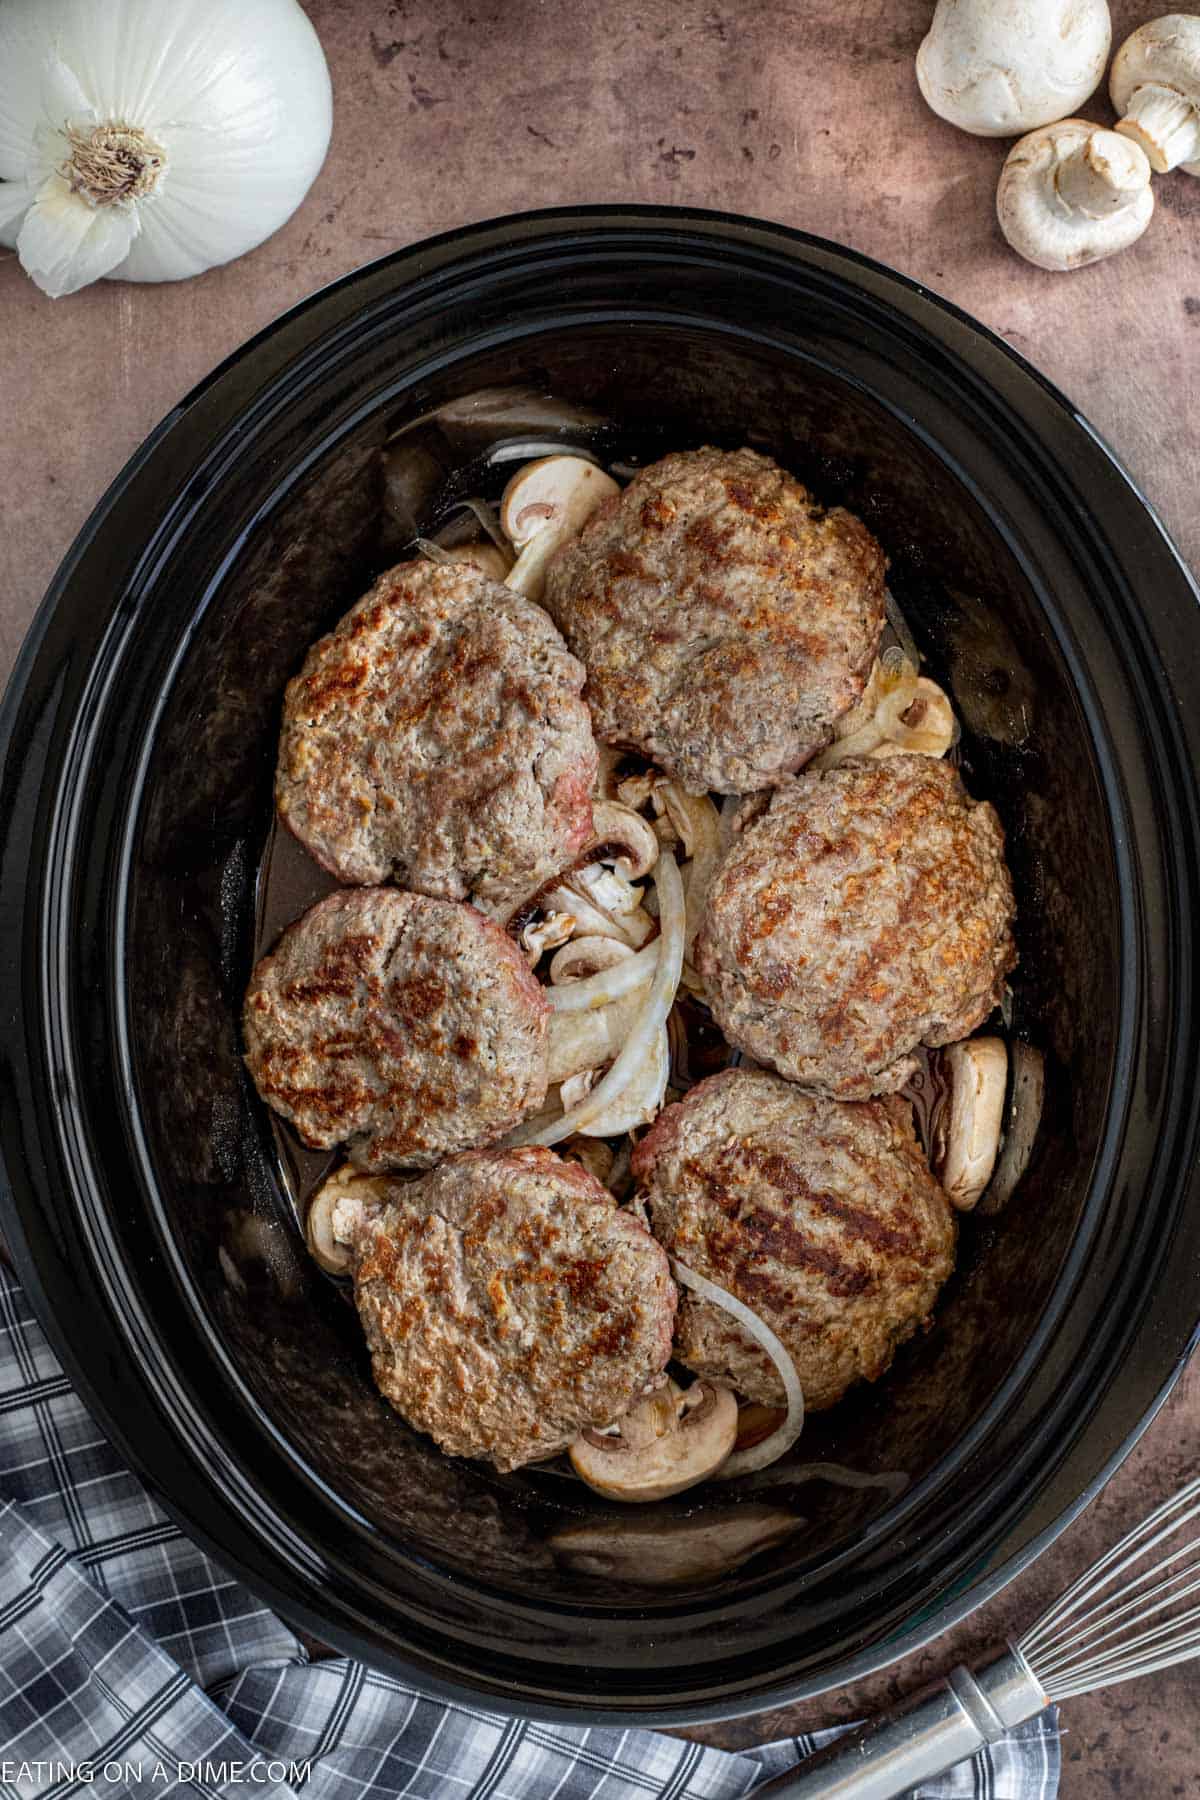 Placing the beef patties in teh slow cooker with the onions and mushrooms